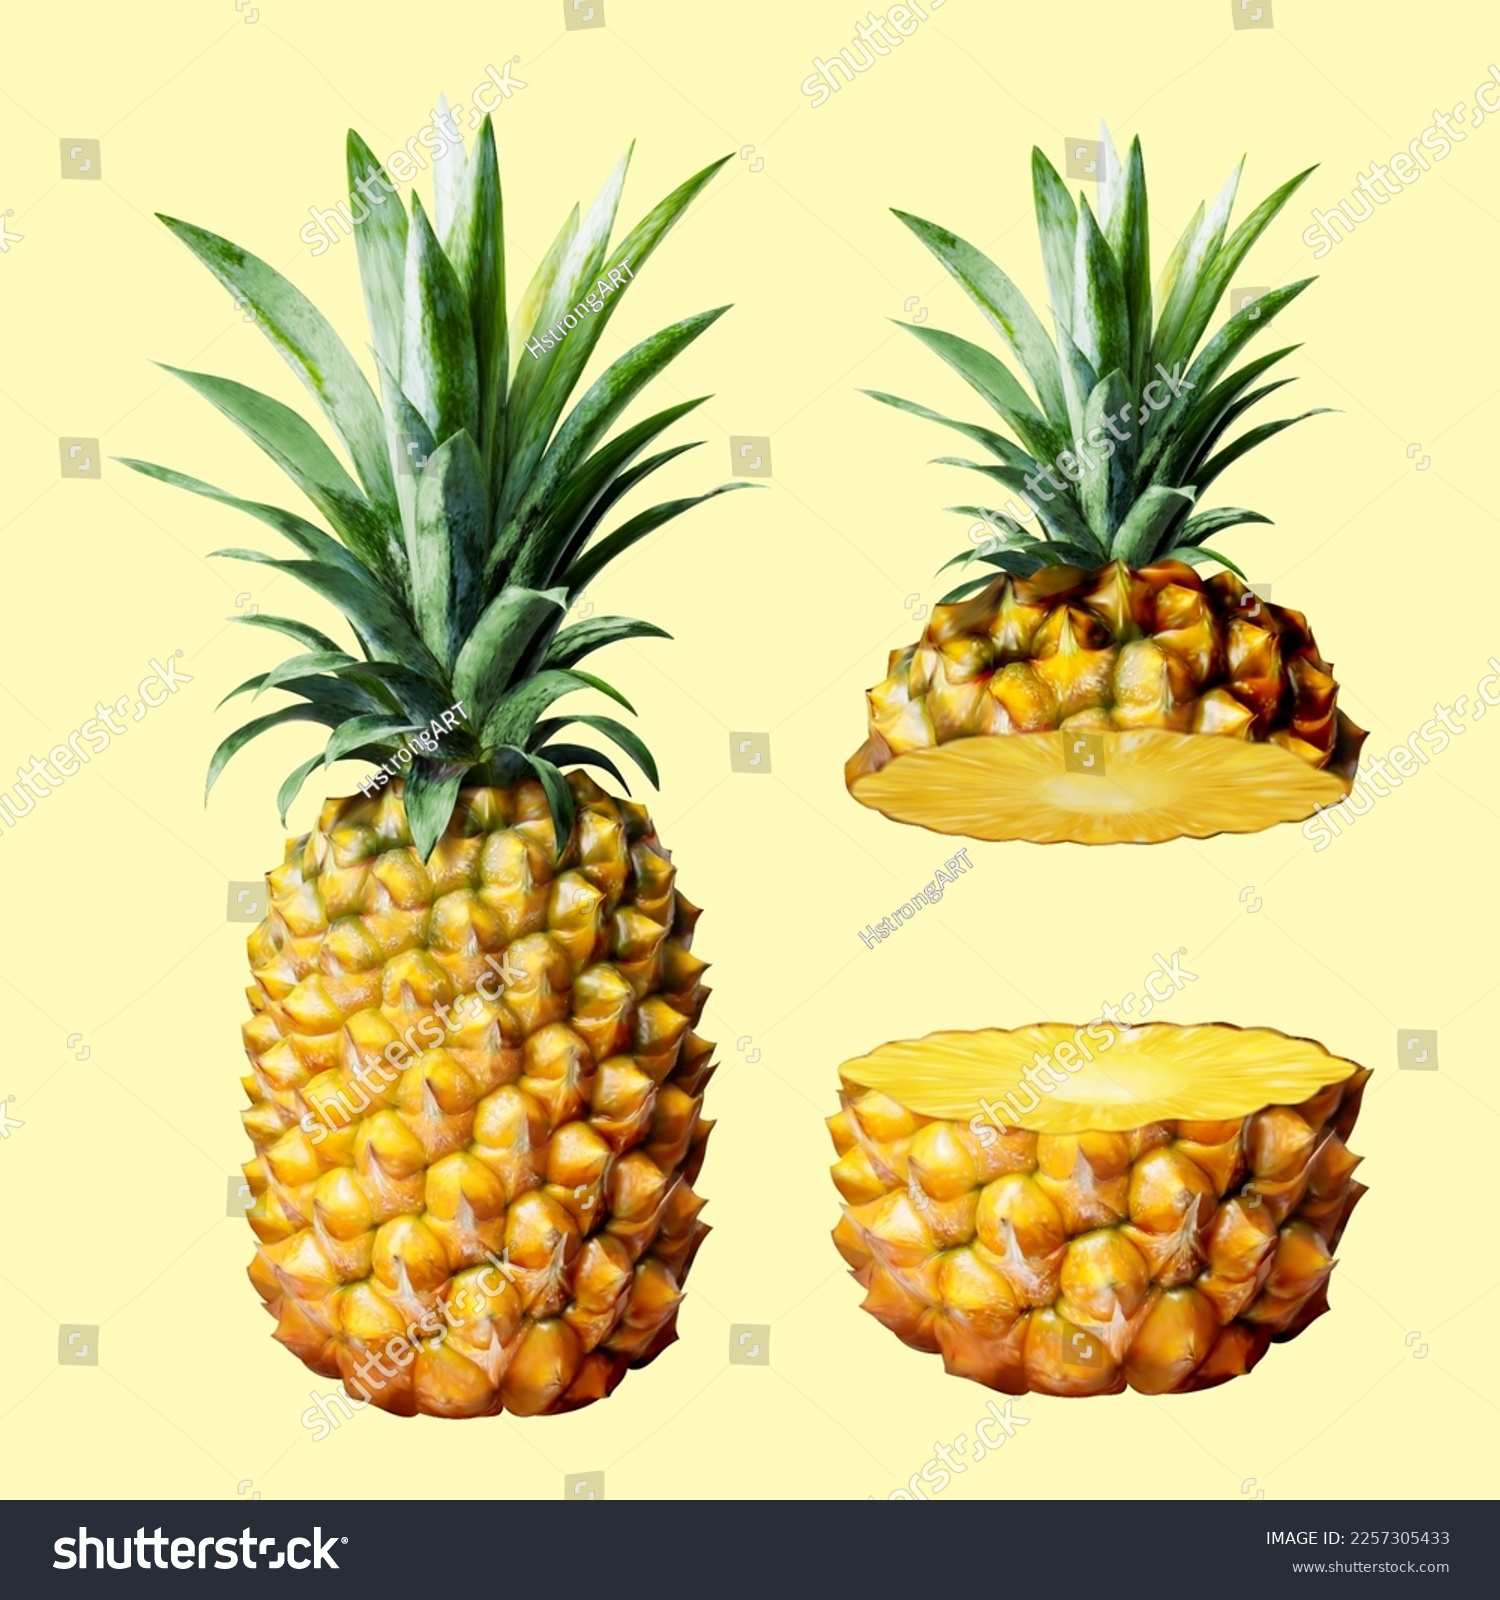 3D illustration of whole pineapple and pineapple cut in half elements isolated on light yellow background #2257305433